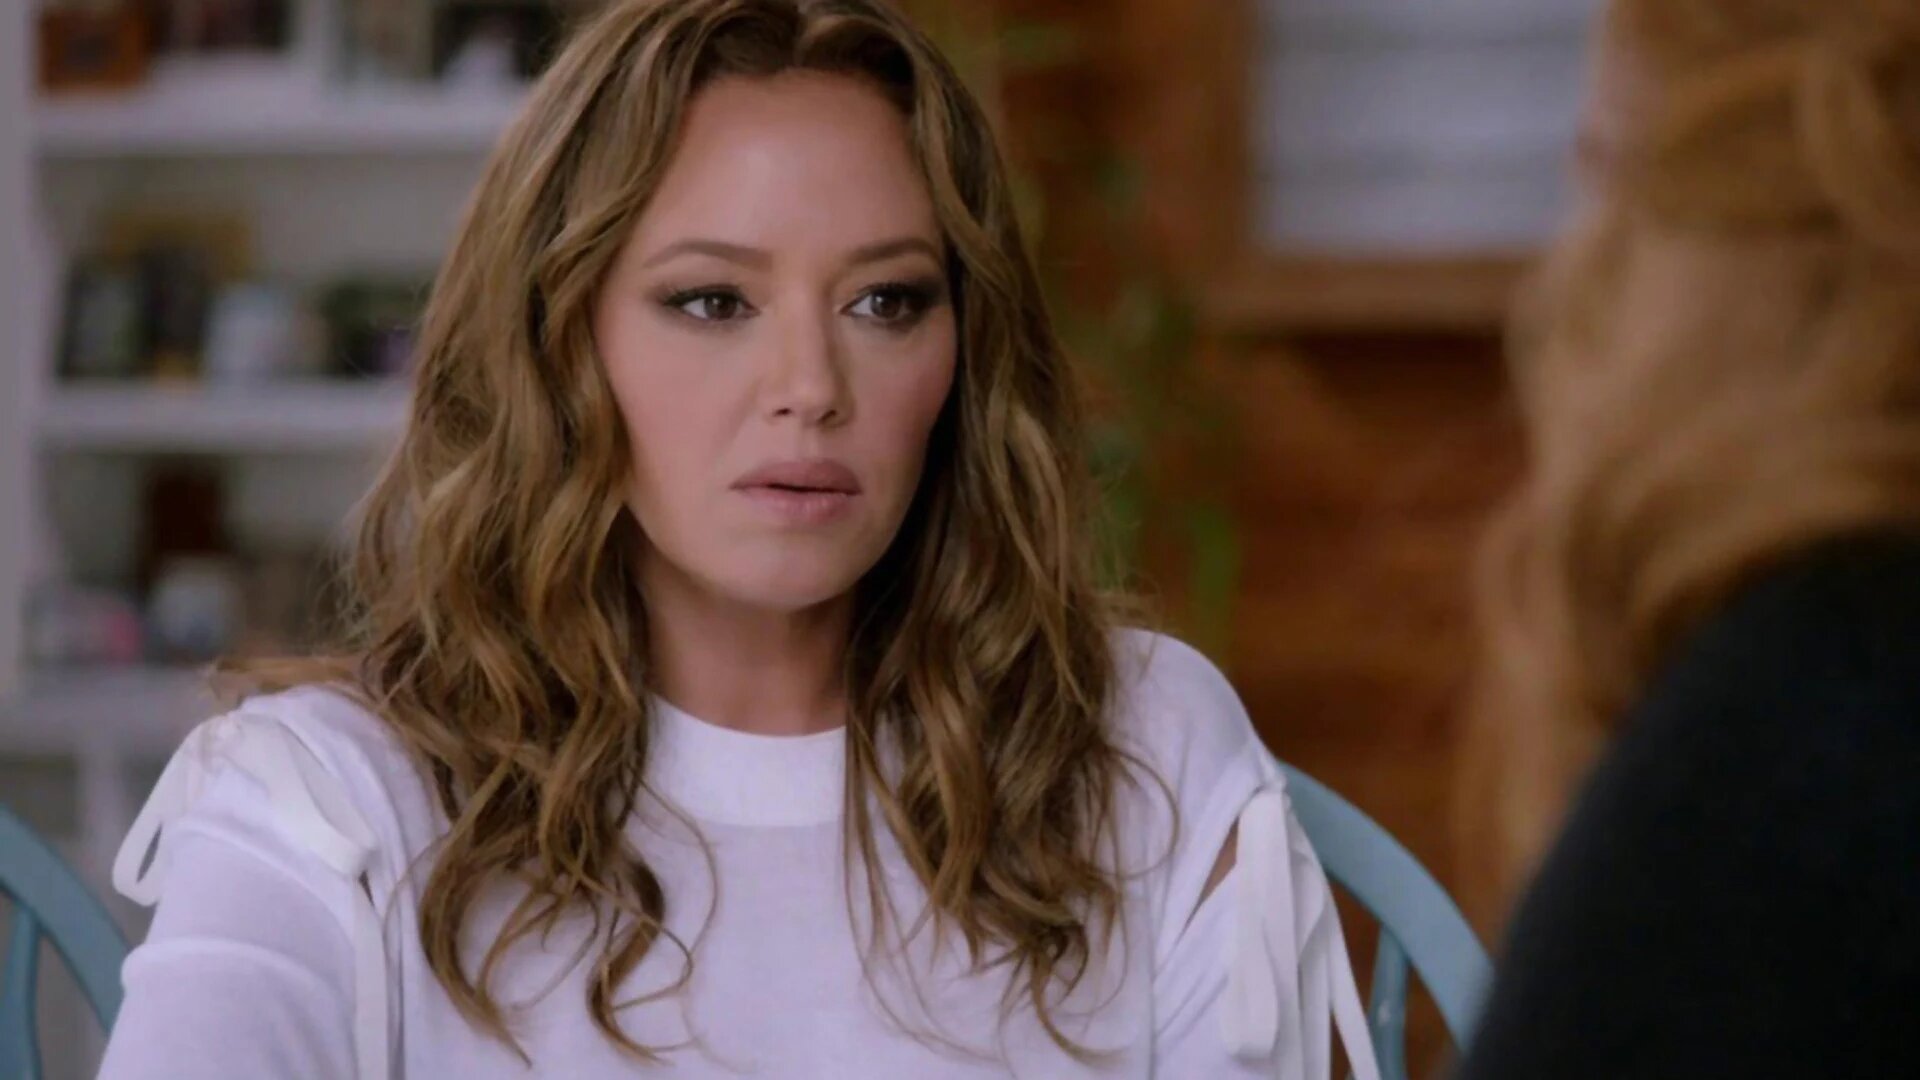 Leah Remini: Scientology and the Aftermath S2E3 The 'Perfect' Scientology Family